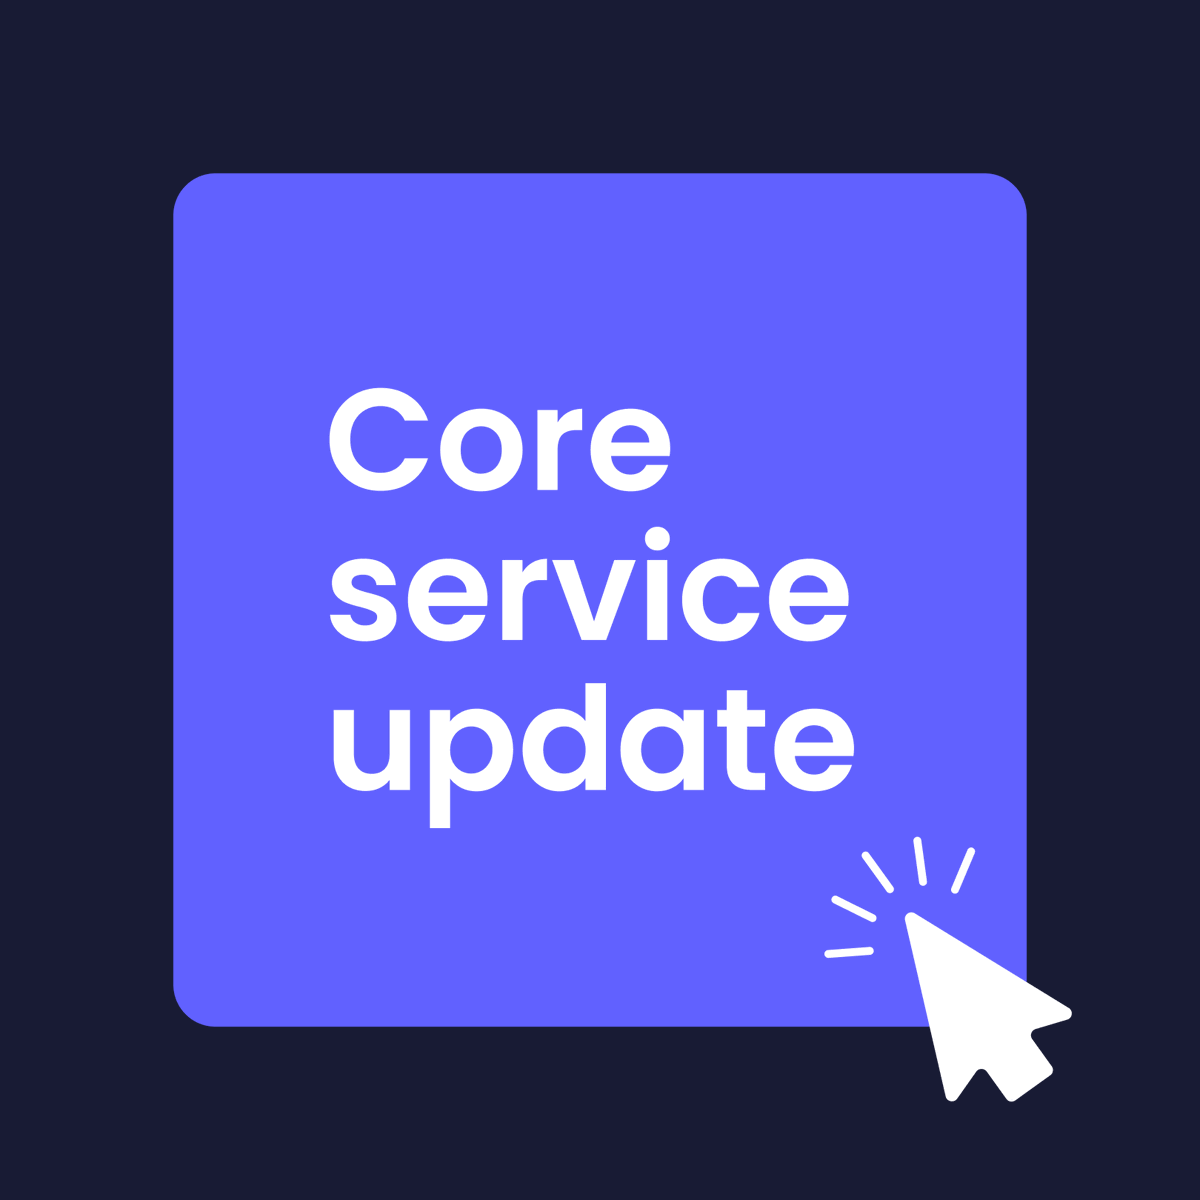 On April 11 and 16, we experienced some service interruptions on our US server that may have impacted your account. We want to share a more detailed update on what happened & how we plan to improve your experience moving forward. Our full update here: bit.ly/3QjdqHs